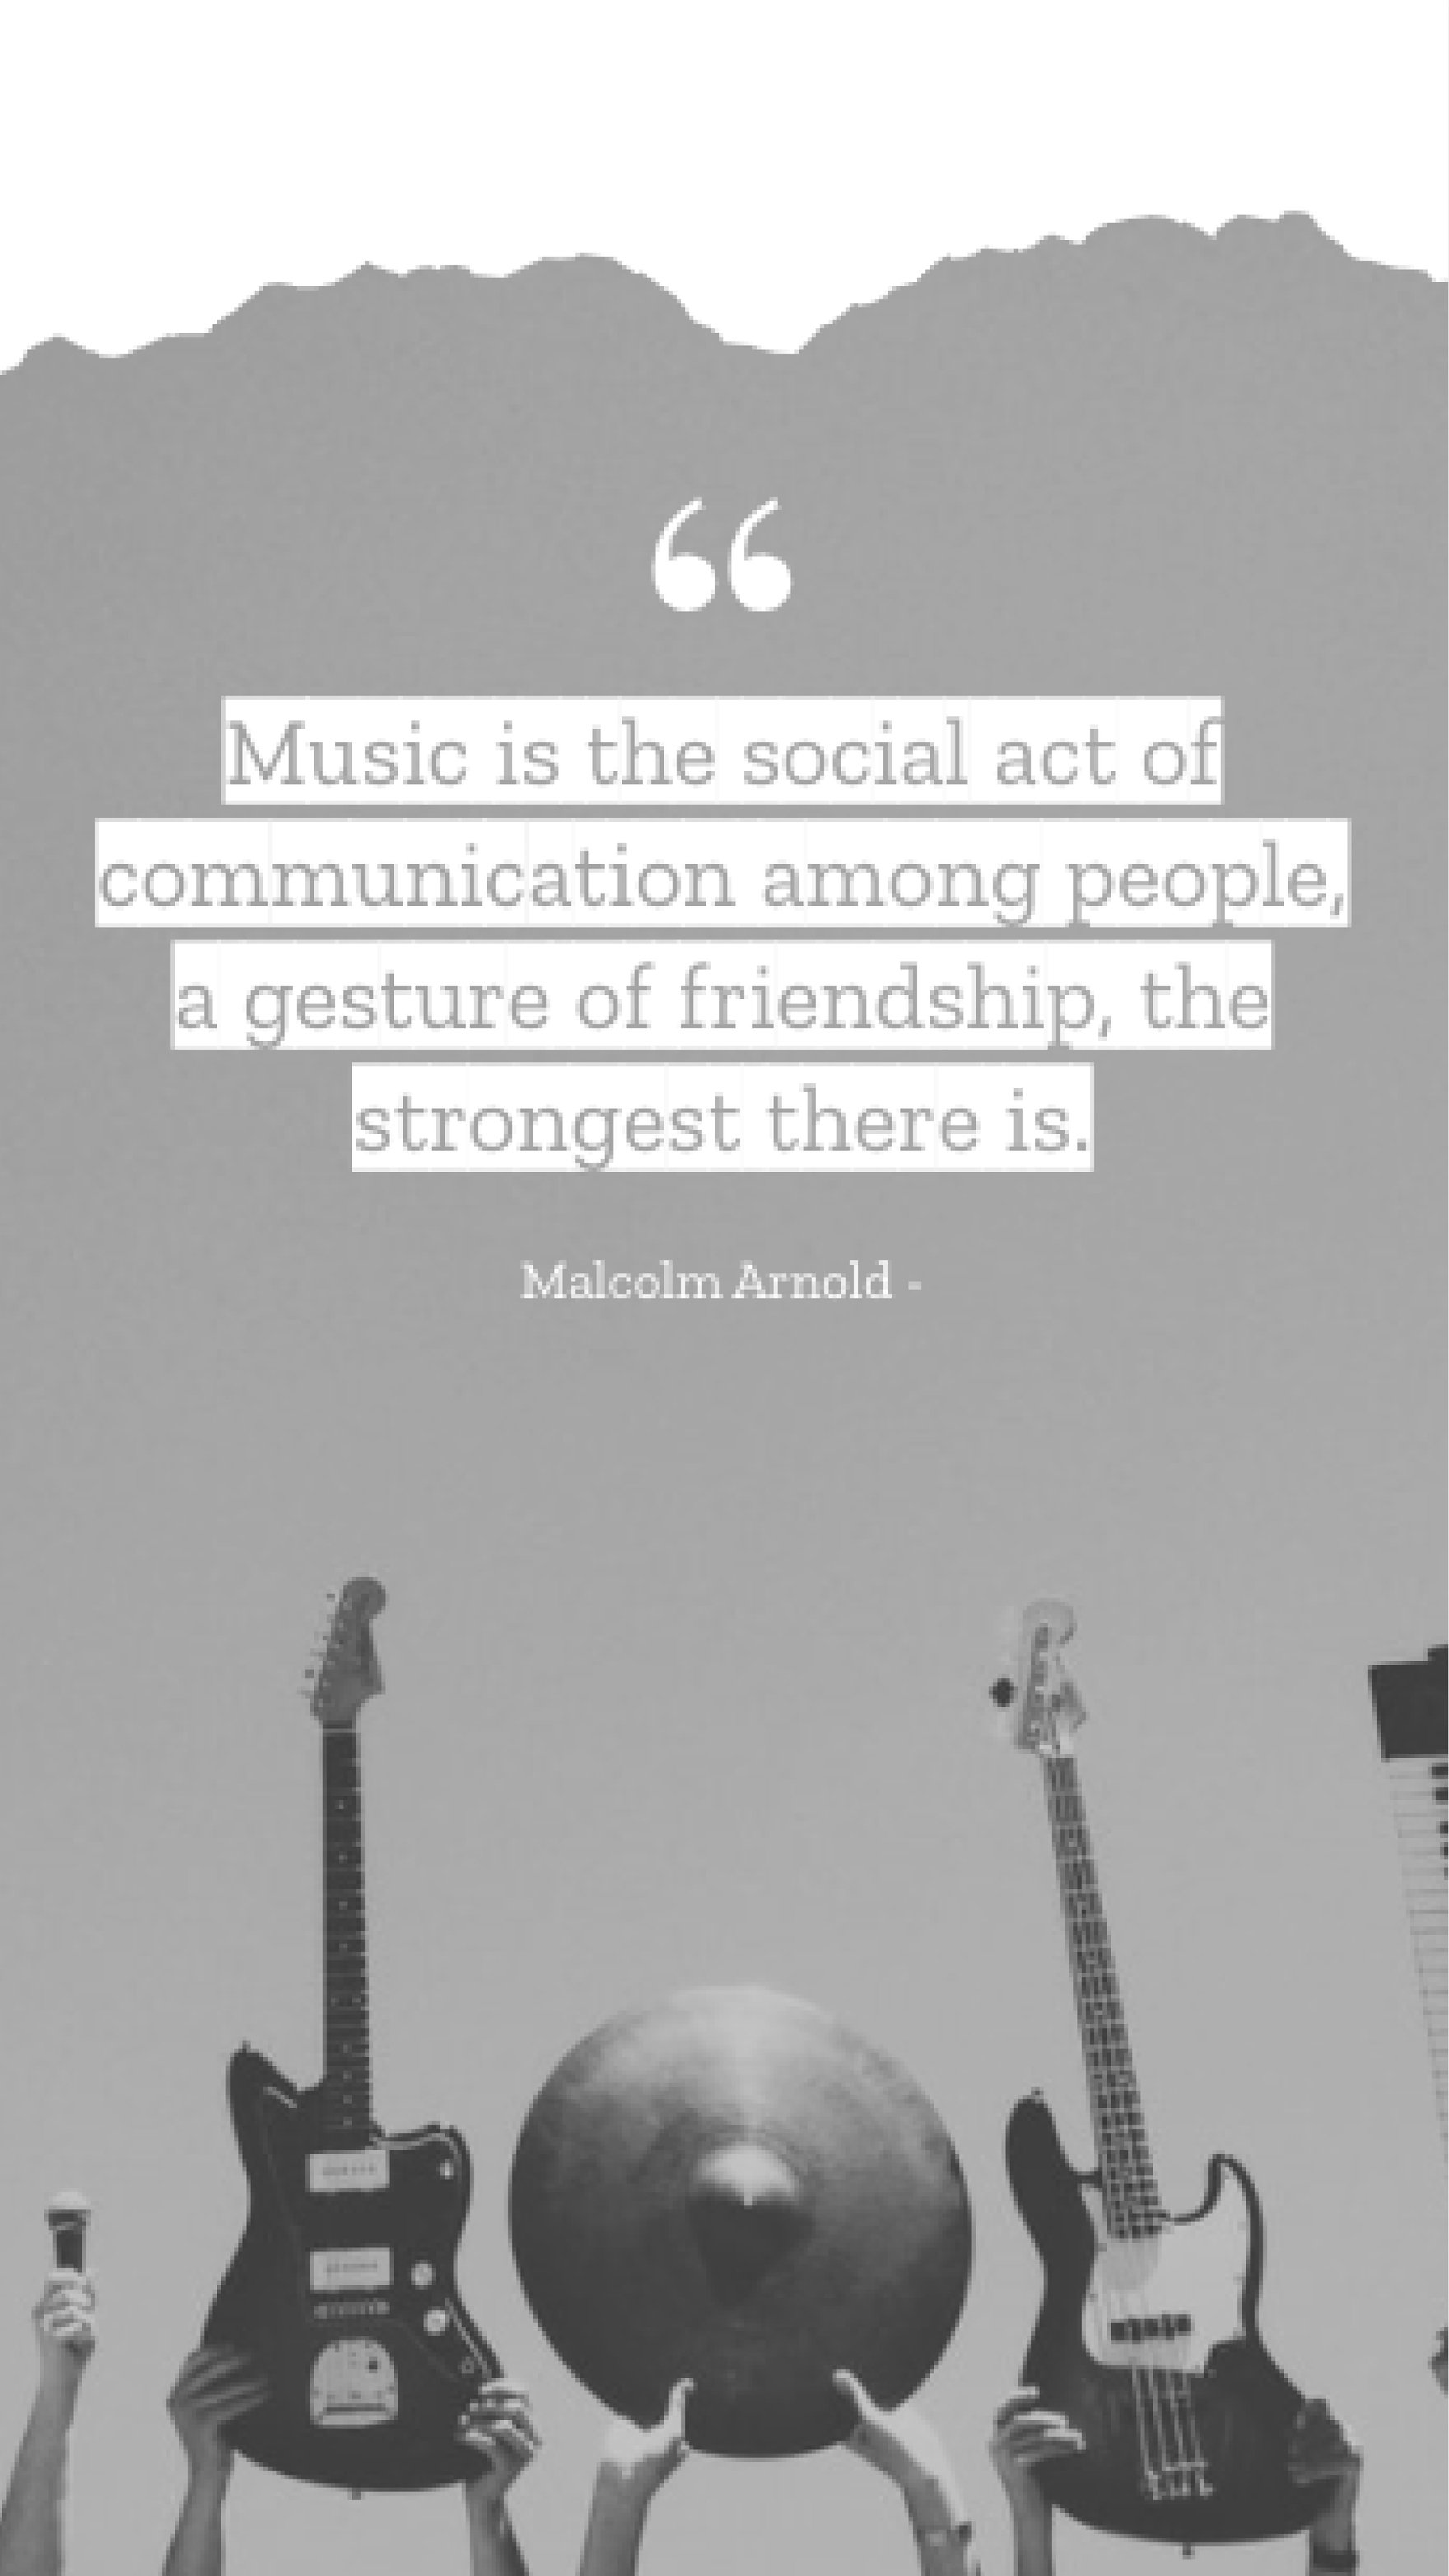 Malcolm Arnold - Music is the social act of communication among people, a gesture of friendship, the strongest there is. Template